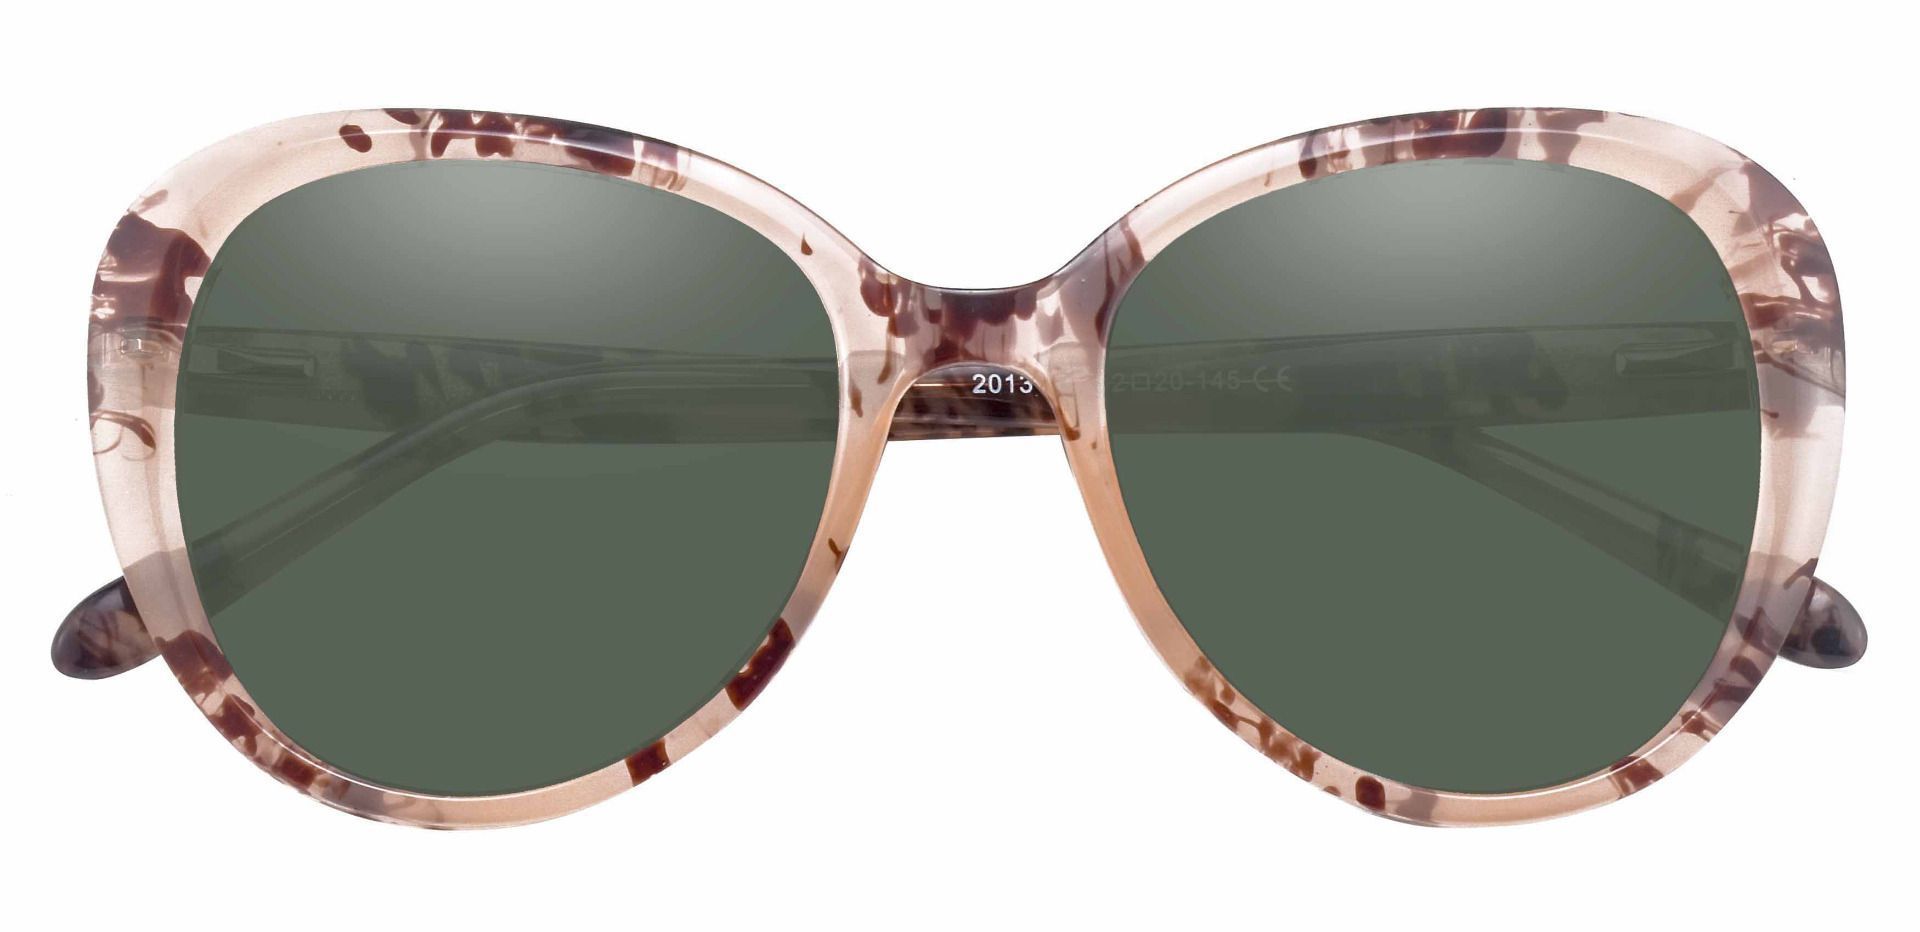 Sheridan Oval Reading Sunglasses - Floral Frame With Green Lenses